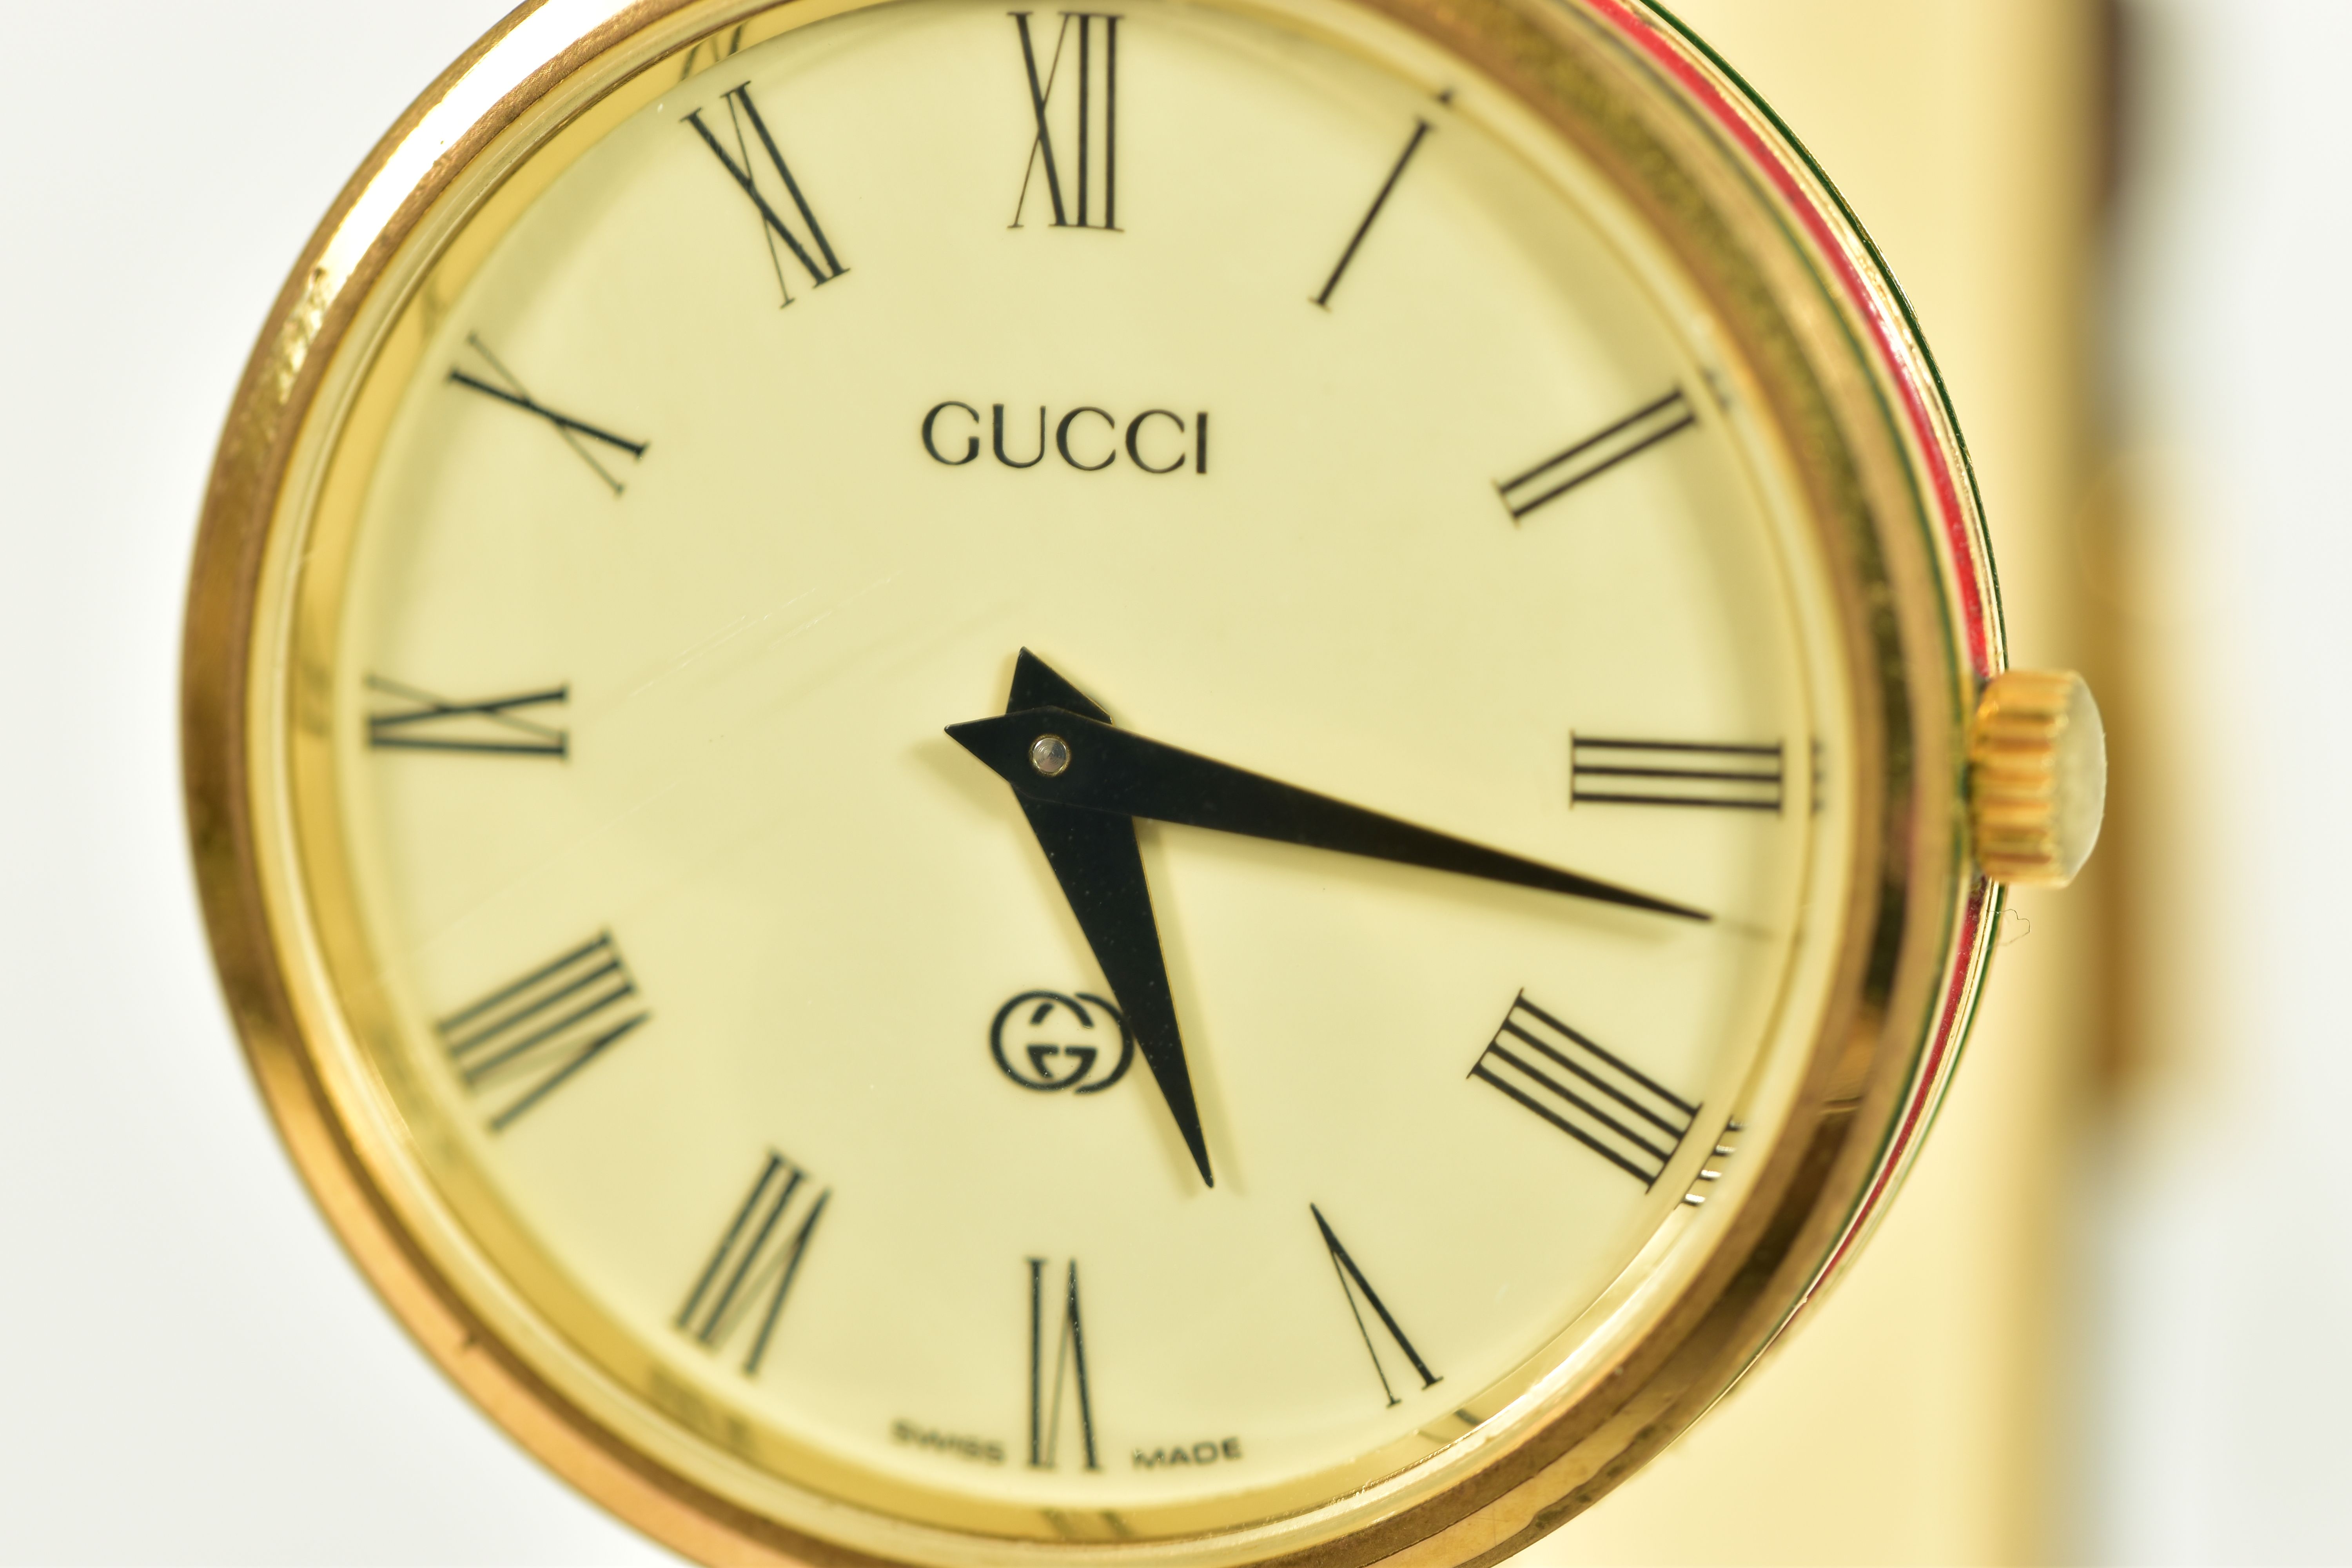 A GOLD-PLATED GUCCI QUARTZ WRISTWATCH, cream dial with roman numerals, round dial with red and green - Image 2 of 4